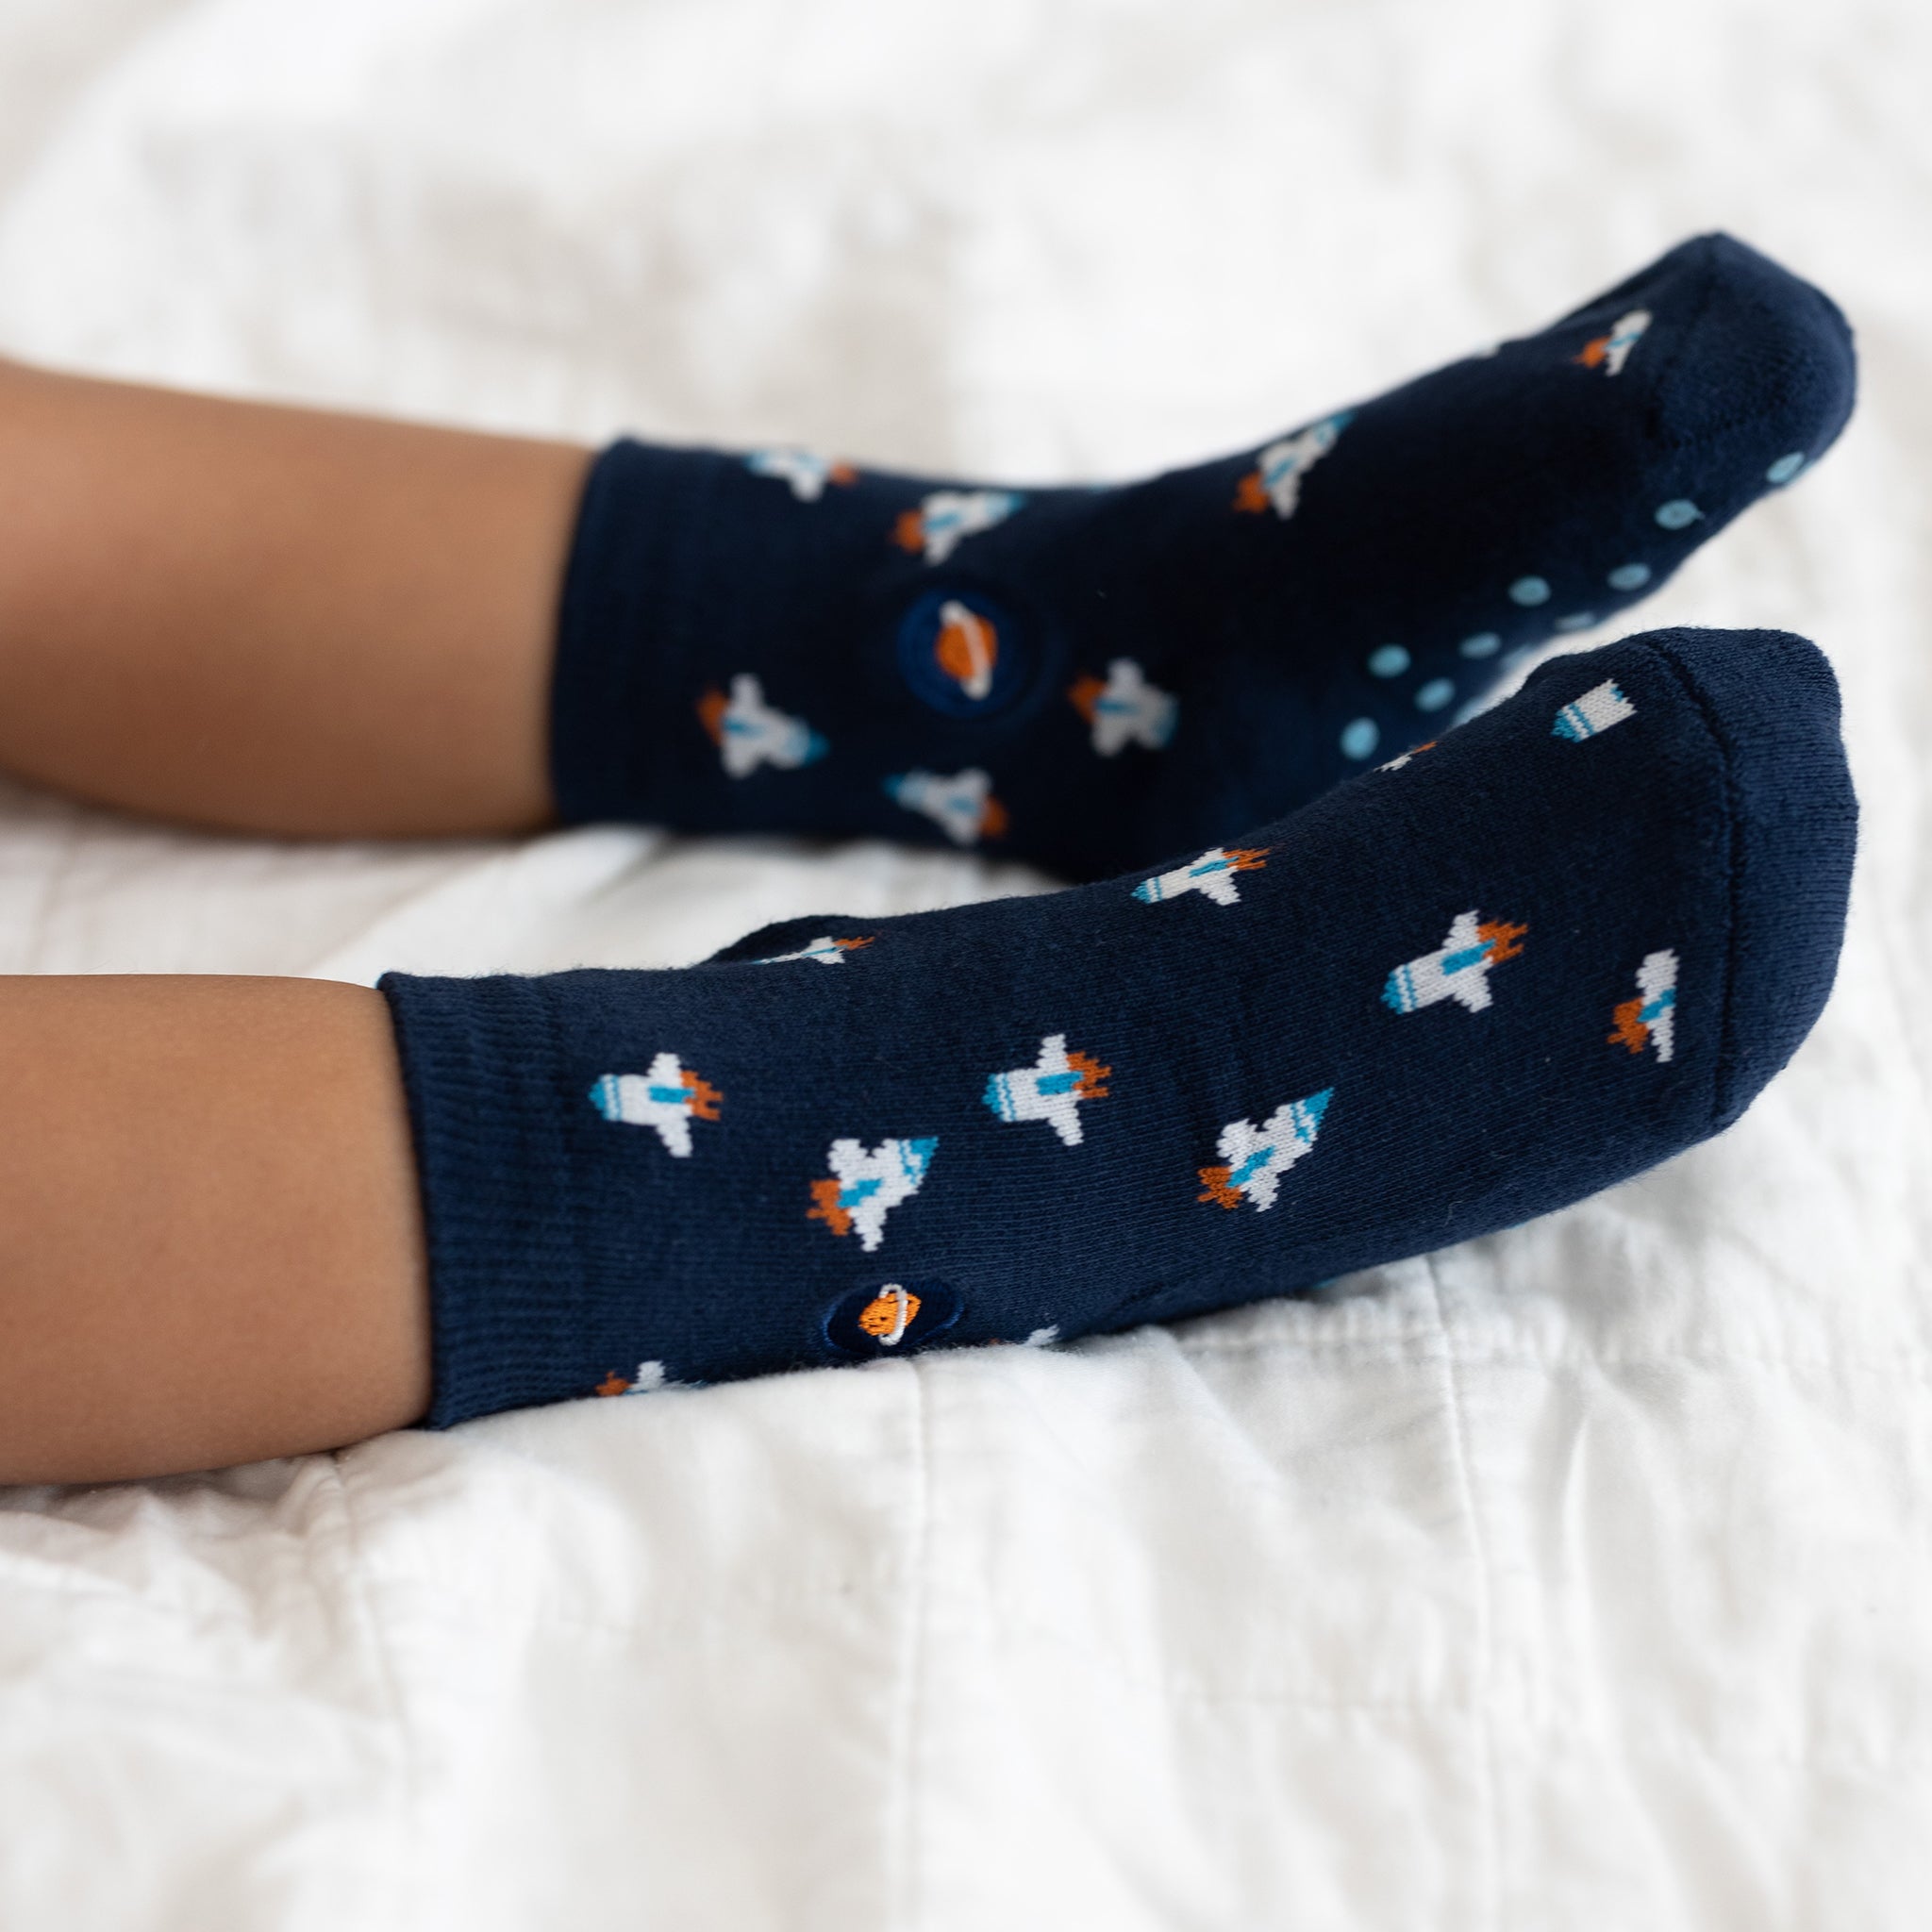 Toddler Socks that Support Space Exploration